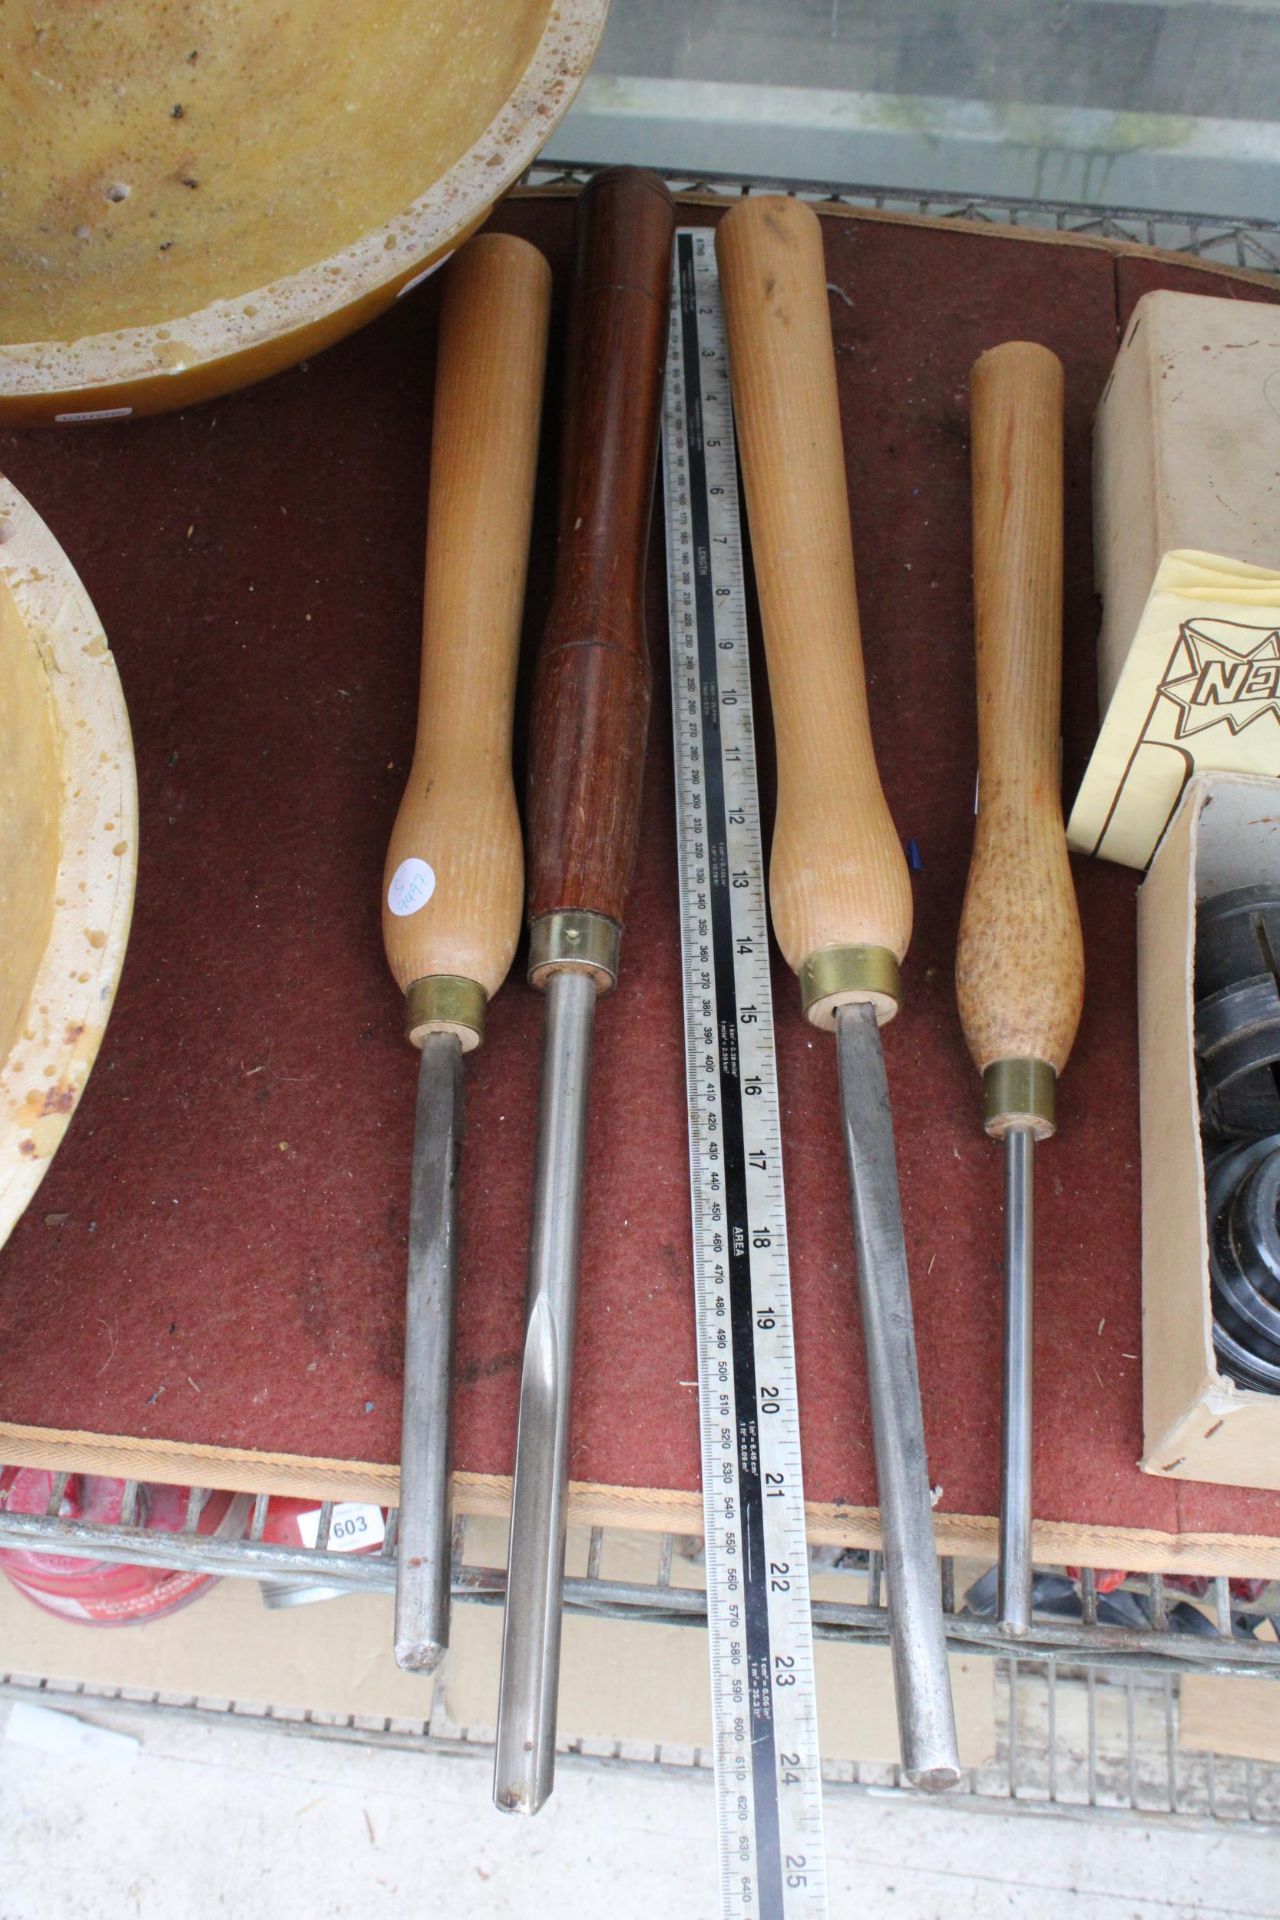 FOUR LARGE WOODEN HANDLED LATHE TOOLS AND CHISELS - Image 2 of 2